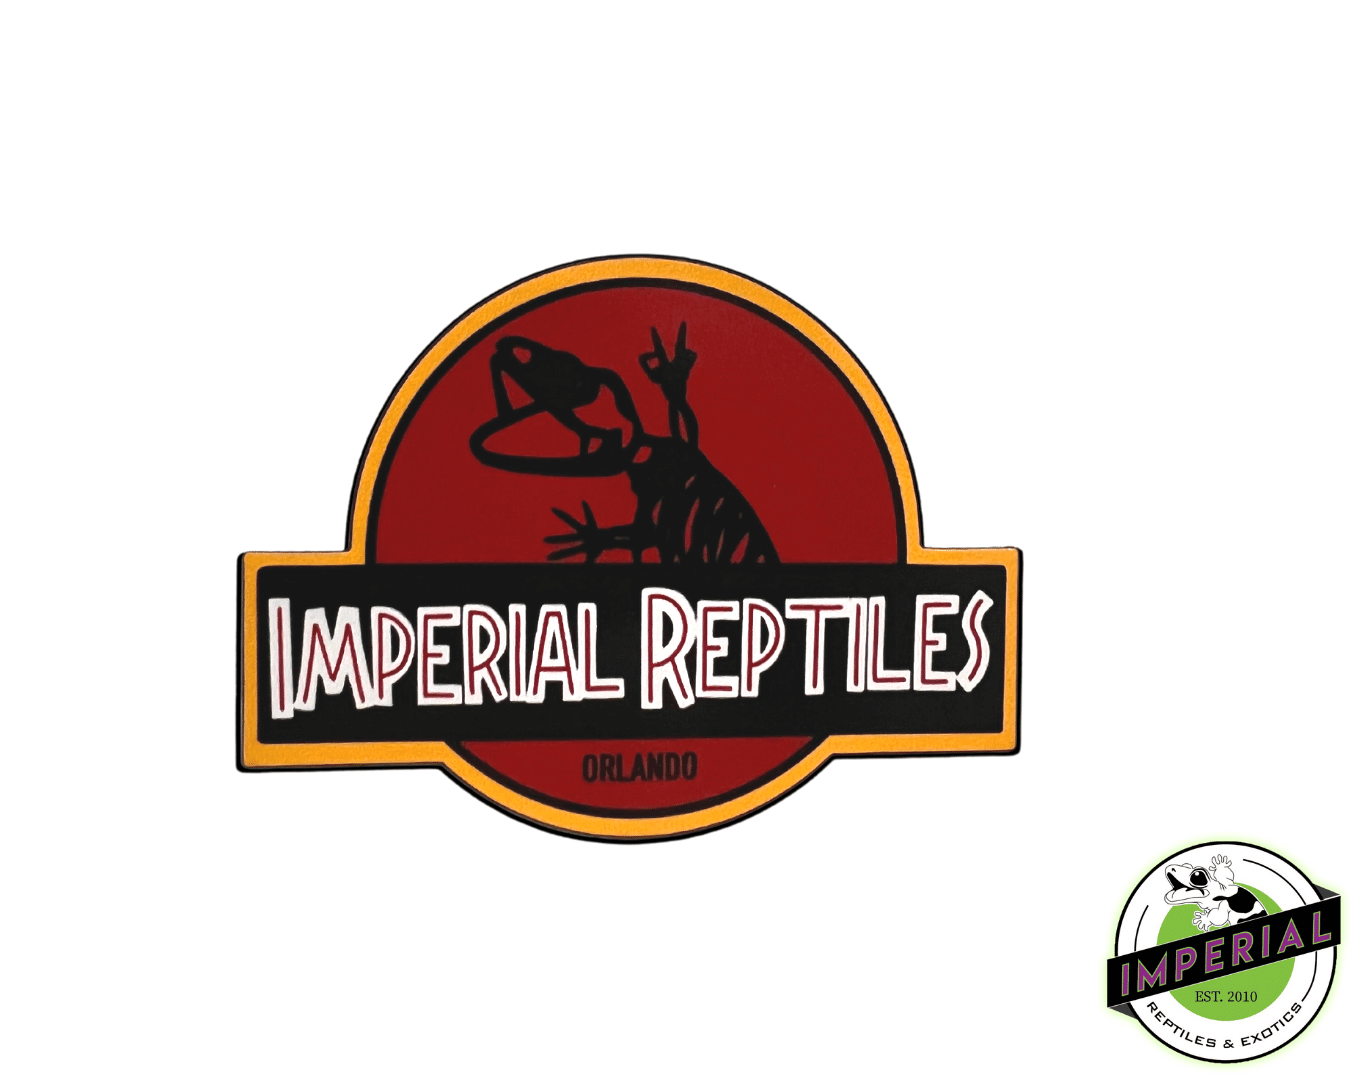 buy unique reptile magnets online at cheap prices. water proof reptile stickers for notebooks, laptops, phone cases, and more